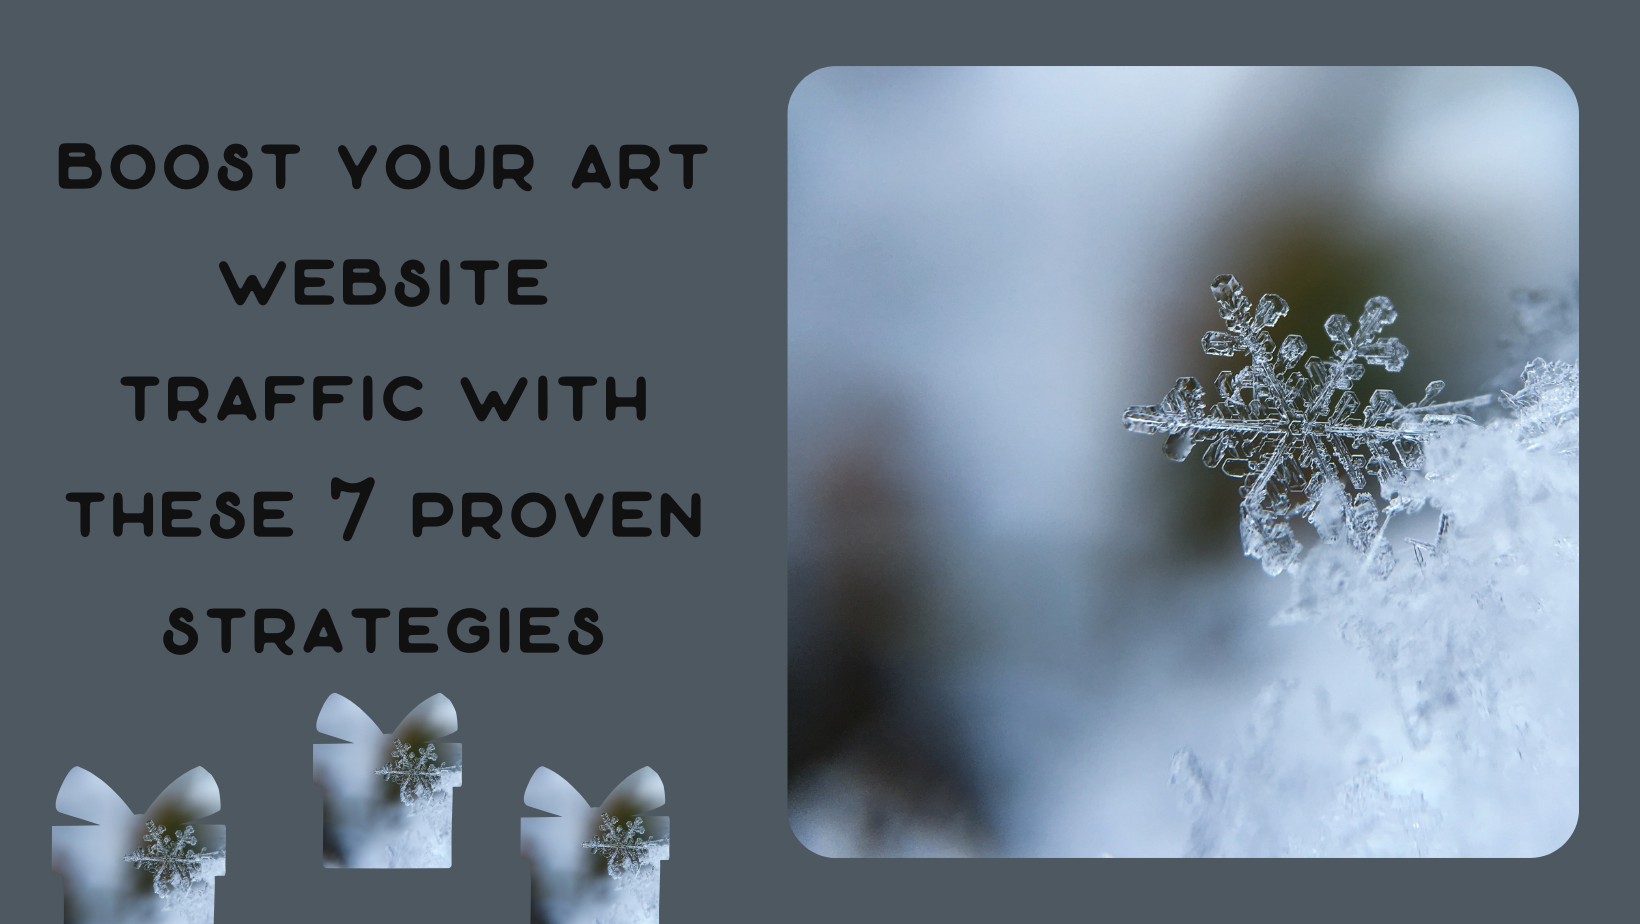 Boost Your Art Website Traffic With These 7 Proven Strategies